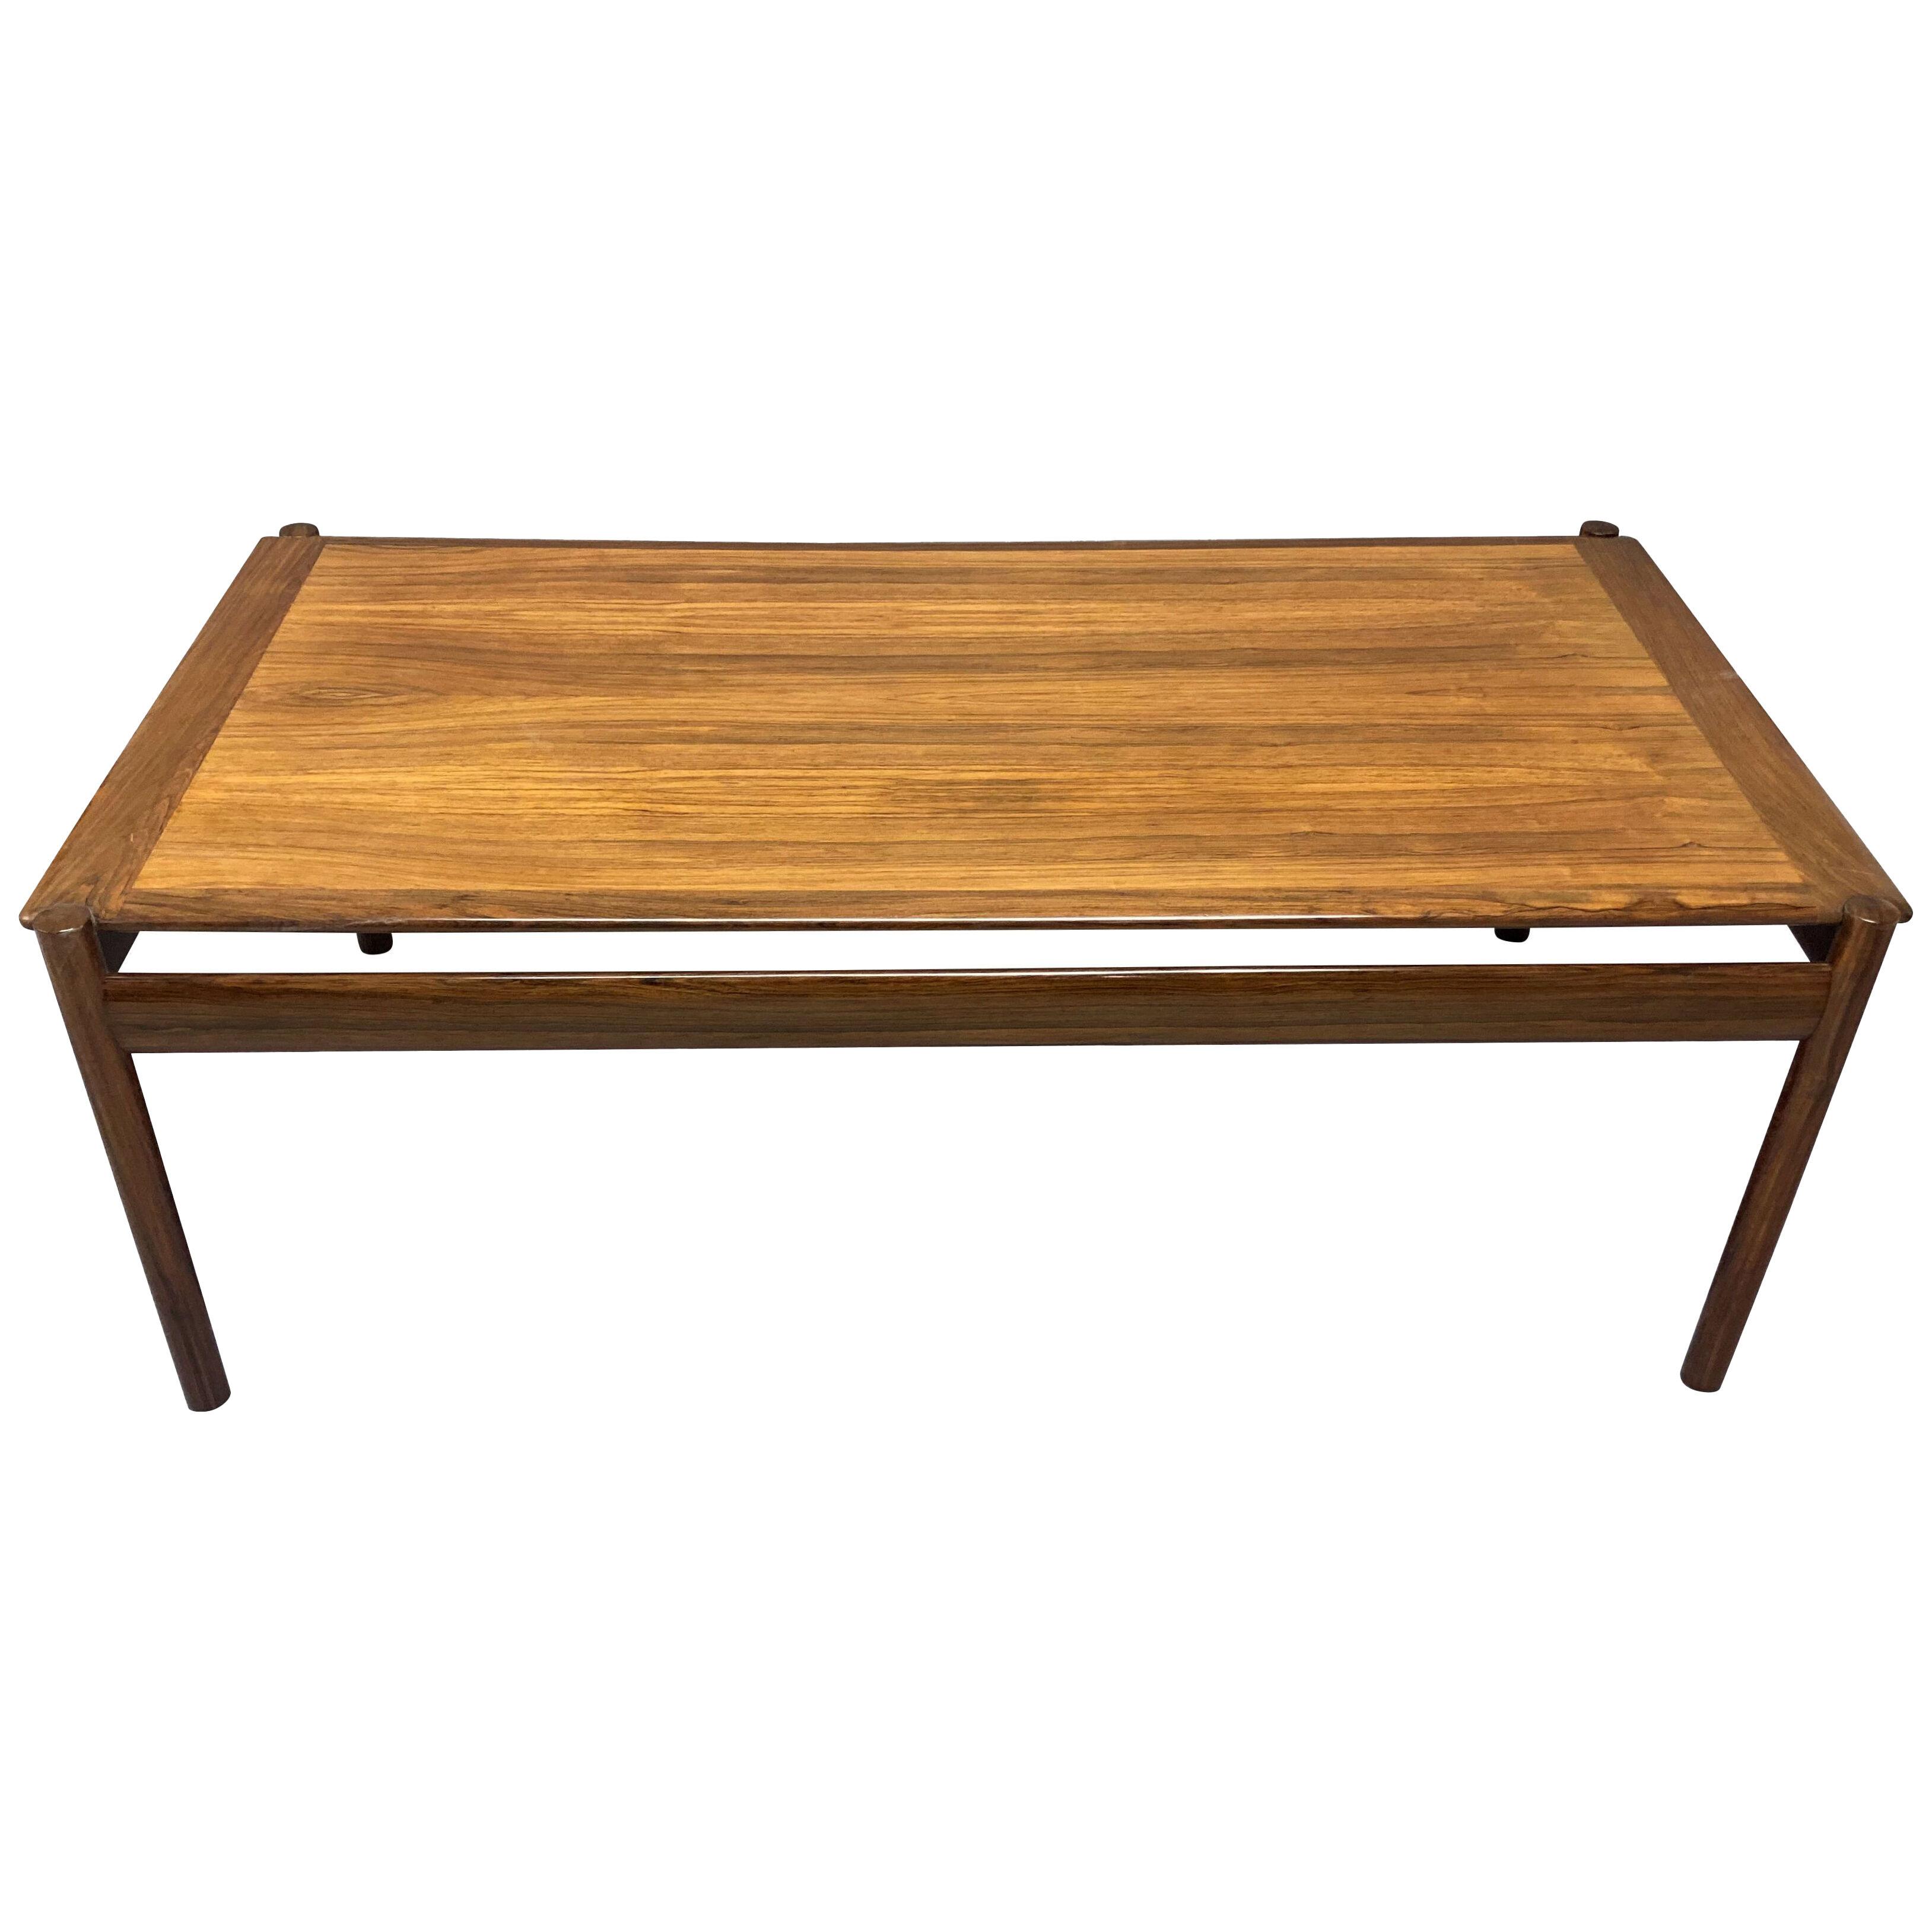 A NORWEGIAN ROSEWOOD OCCASIONAL TABLE BY DOKKA MOBLER